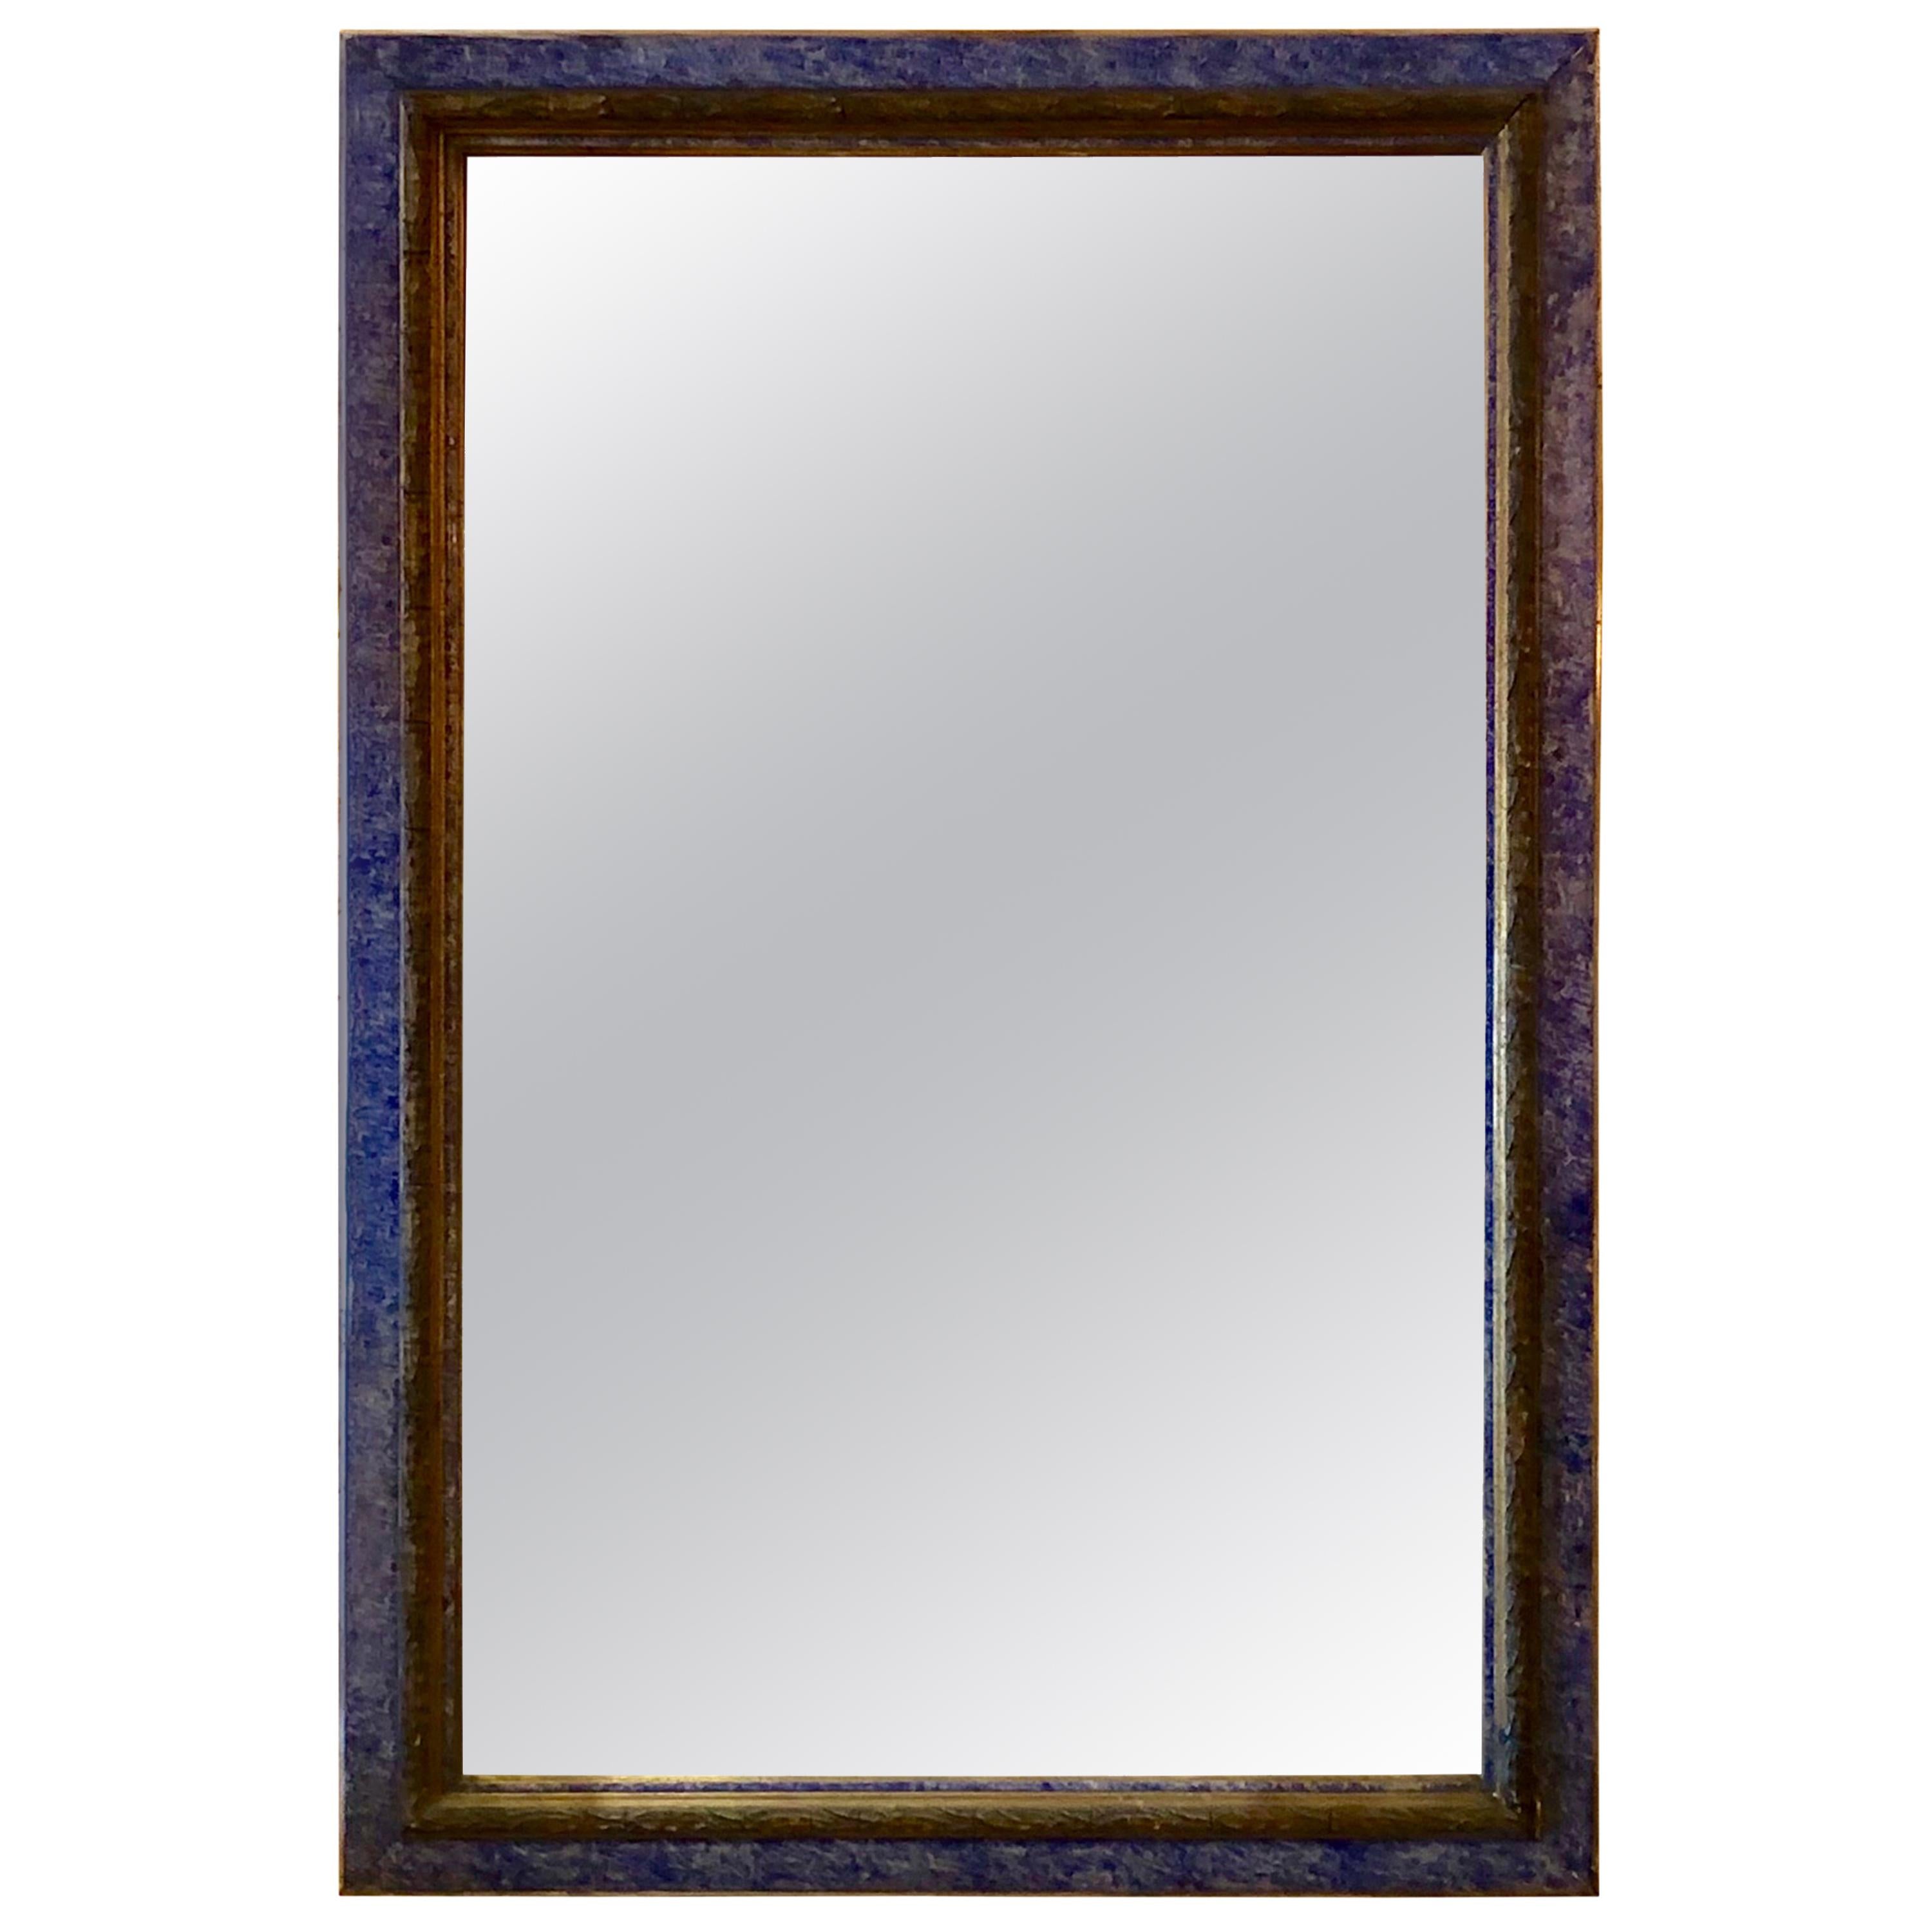 French Faux Finished Mirror with Vibrant Blue Frame, Late 19th Century